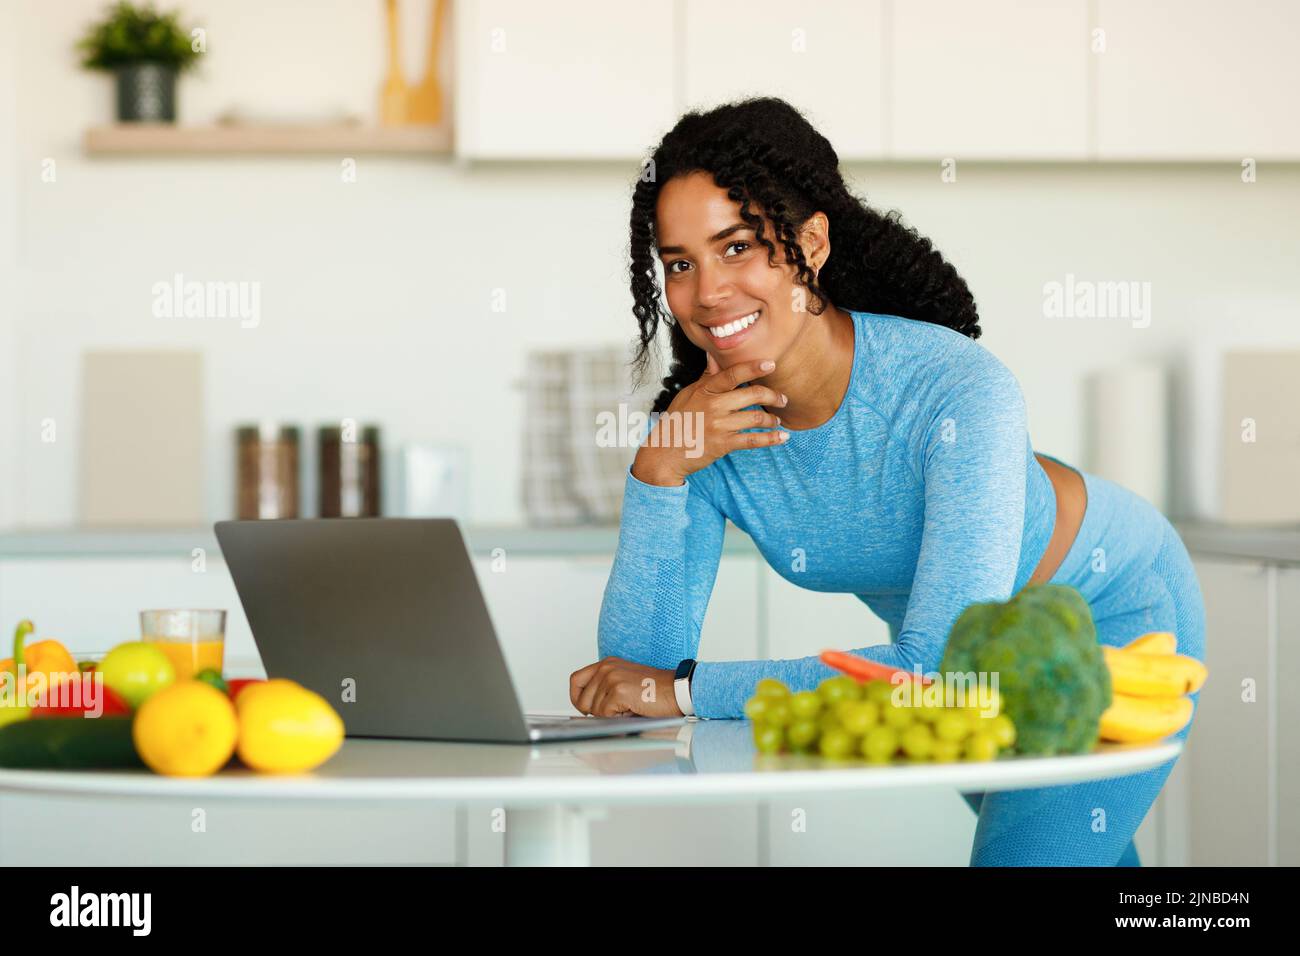 Searching for new healthy recipes. Happy fit lady cooking fresh salad at home in modern kitchen, using laptop Stock Photo